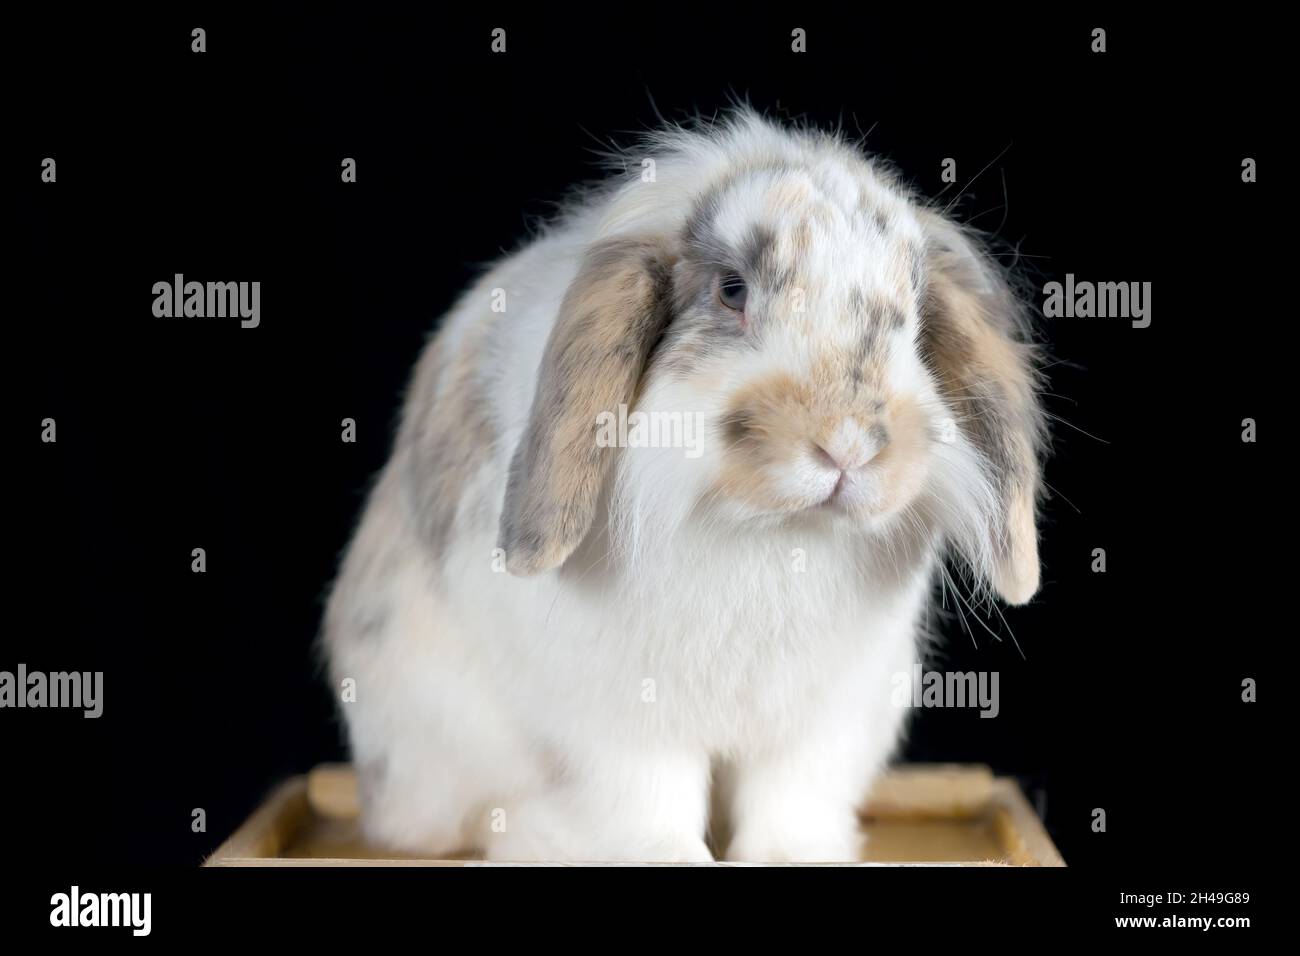 Cute white and brownspotted lop rabbit posing on black background Stock Photo